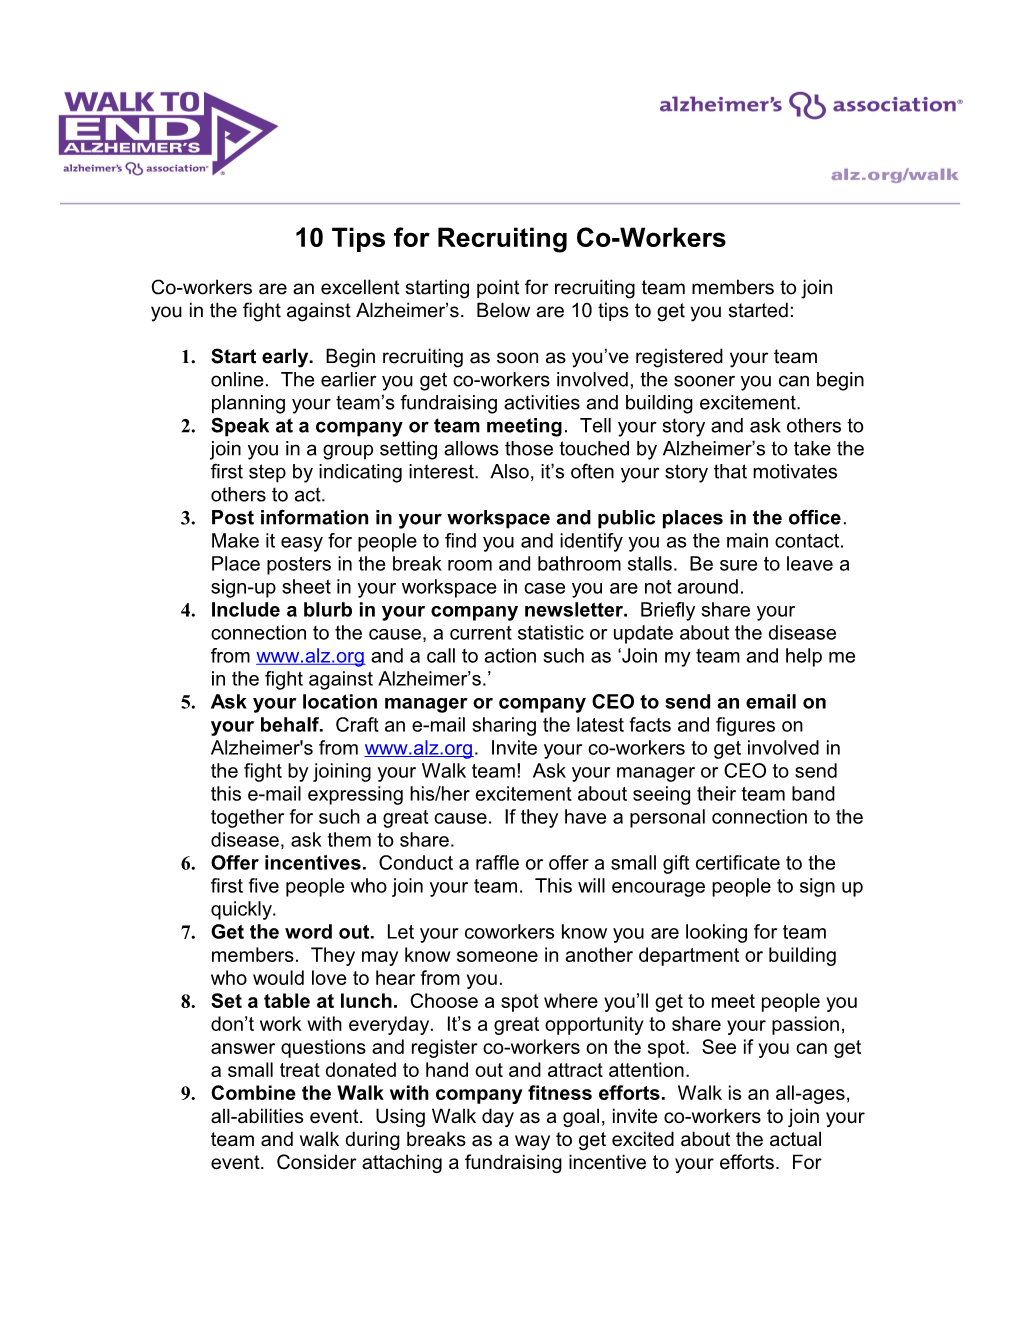 10 Tips for Recruiting Co-Workers